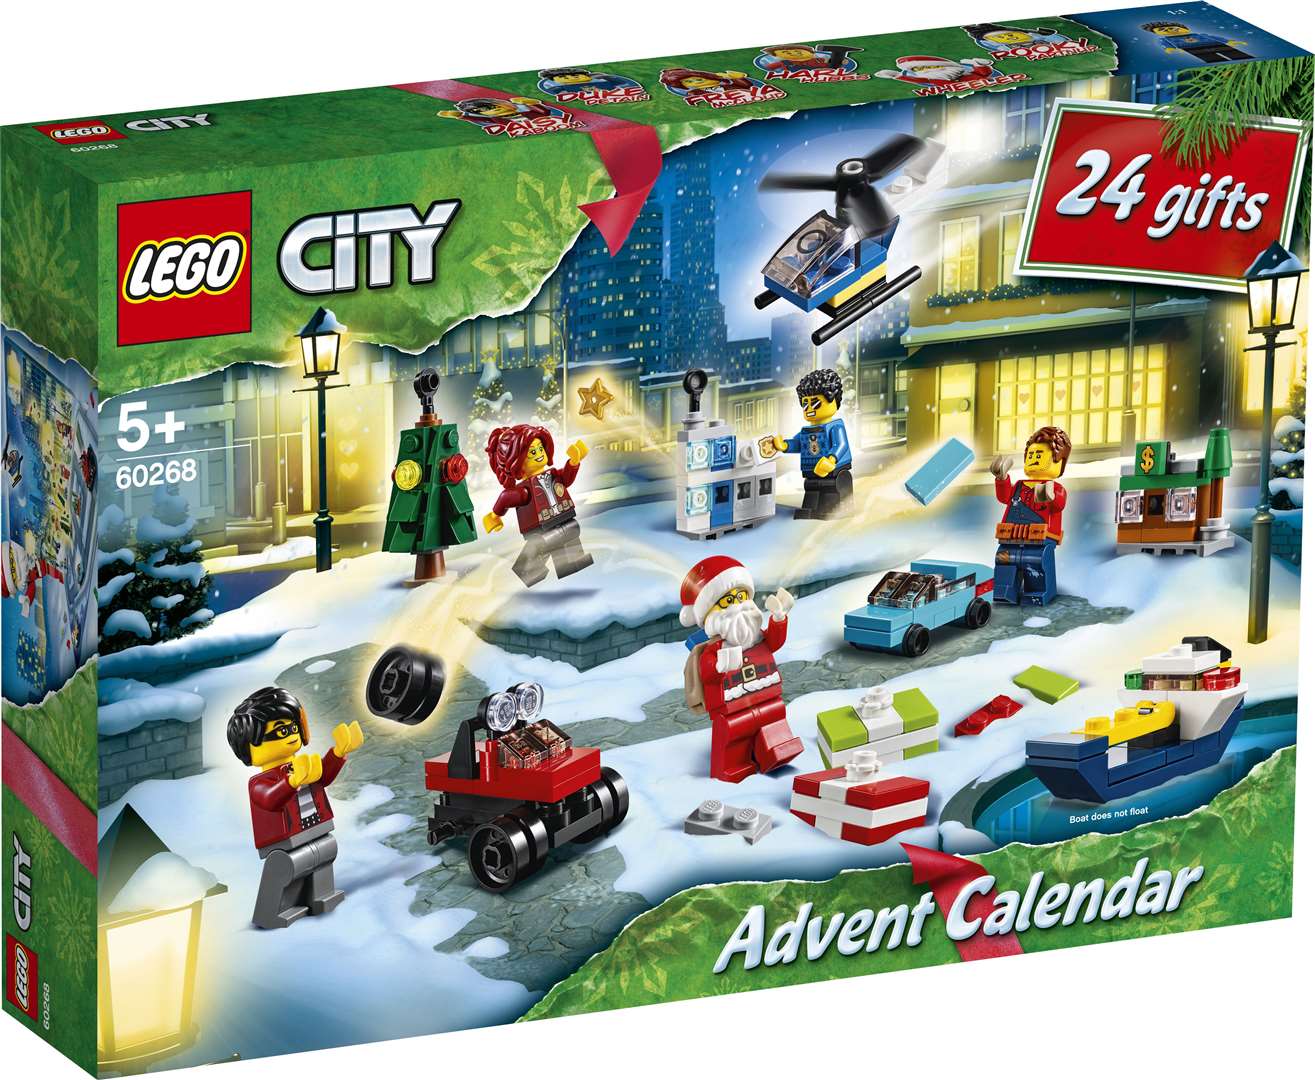 LEGO City included television characters